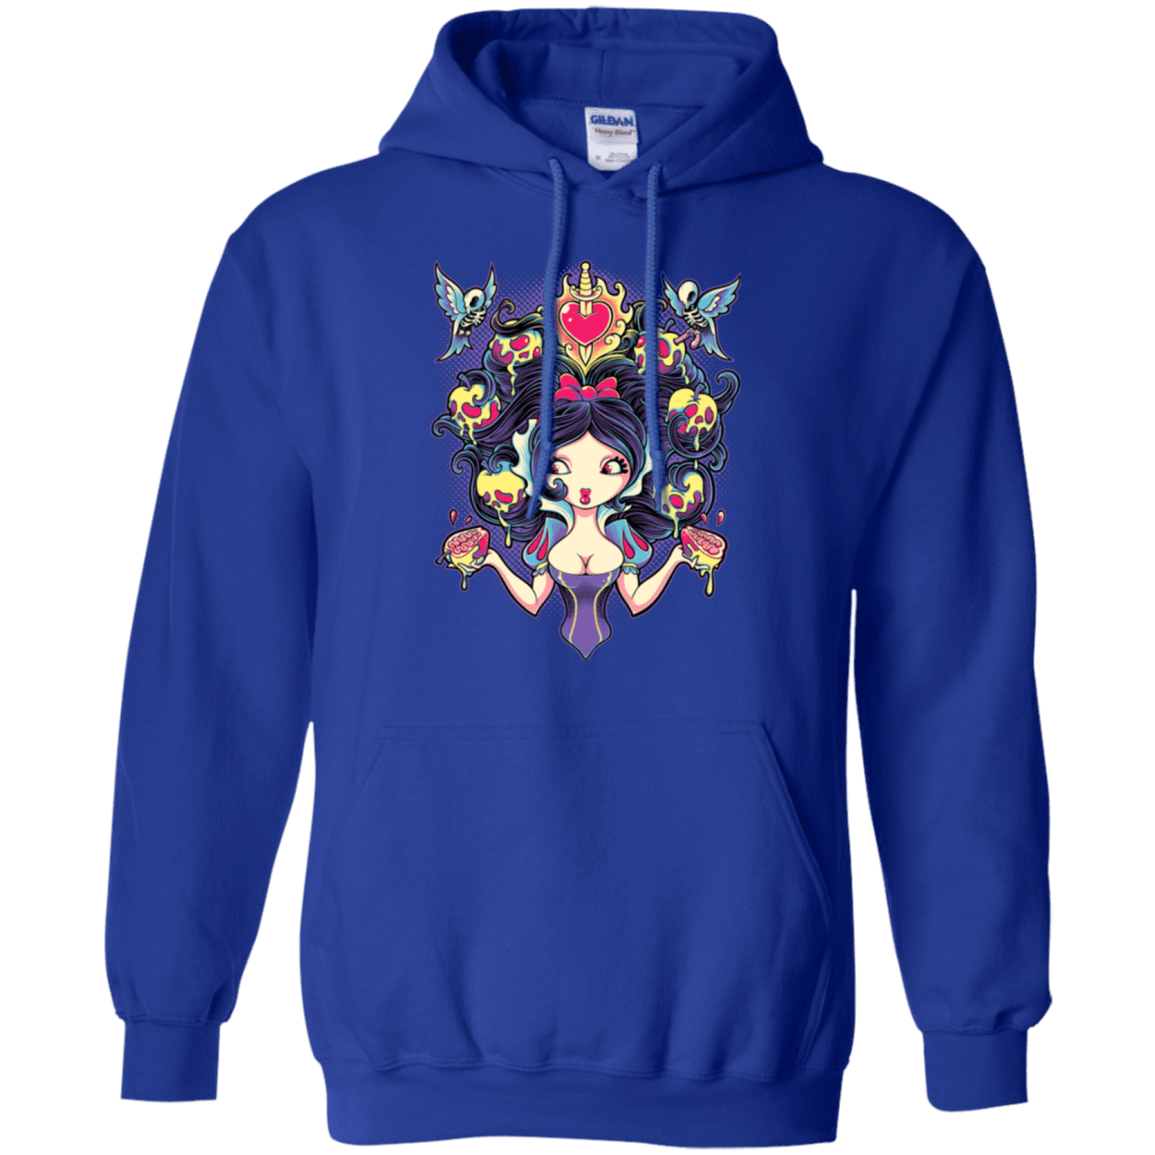 Sweatshirts Royal / Small Poisoned Mind Pullover Hoodie